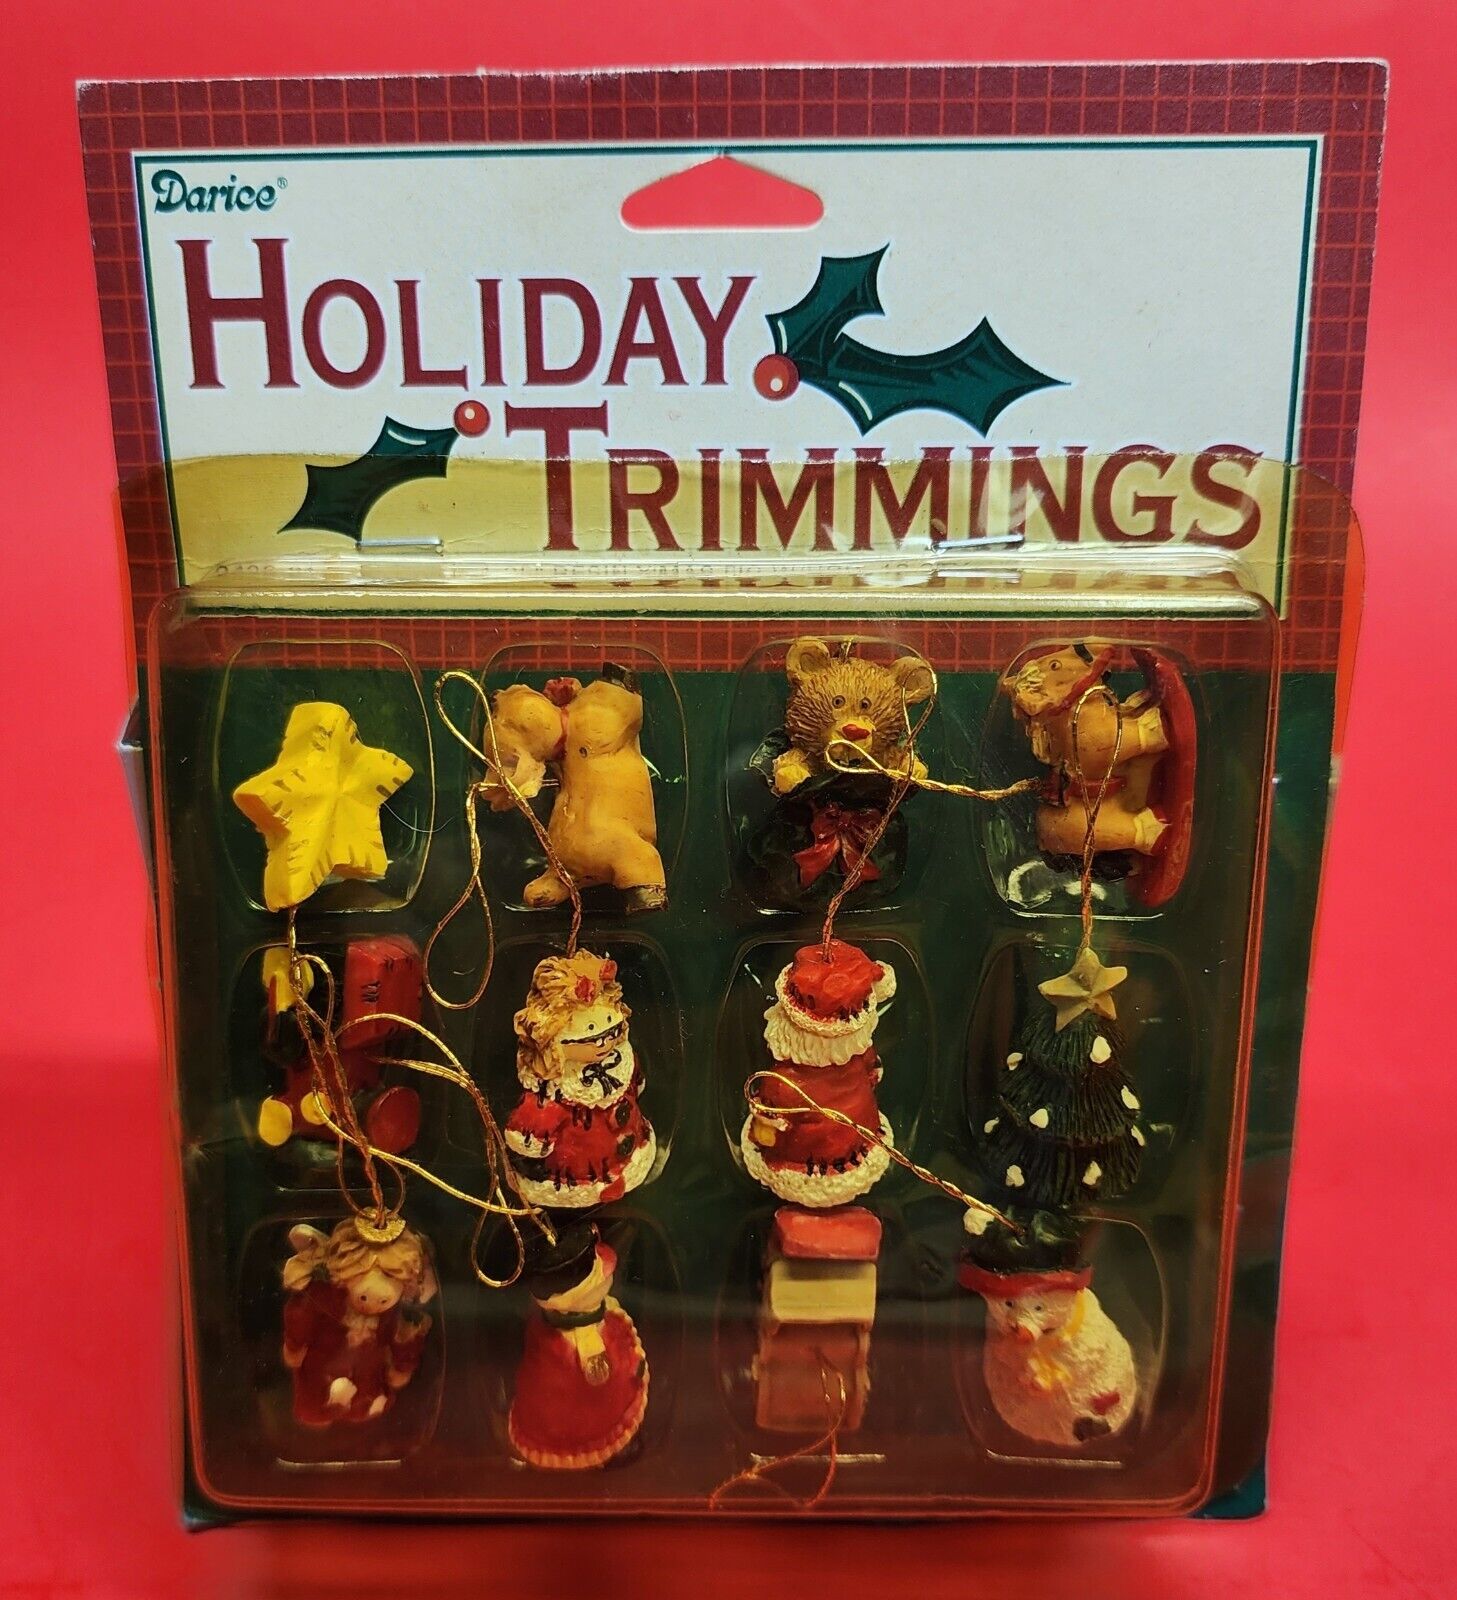 Darice Holiday Trimmings Miniature Unique Resin Christmas Ornaments 12 piece